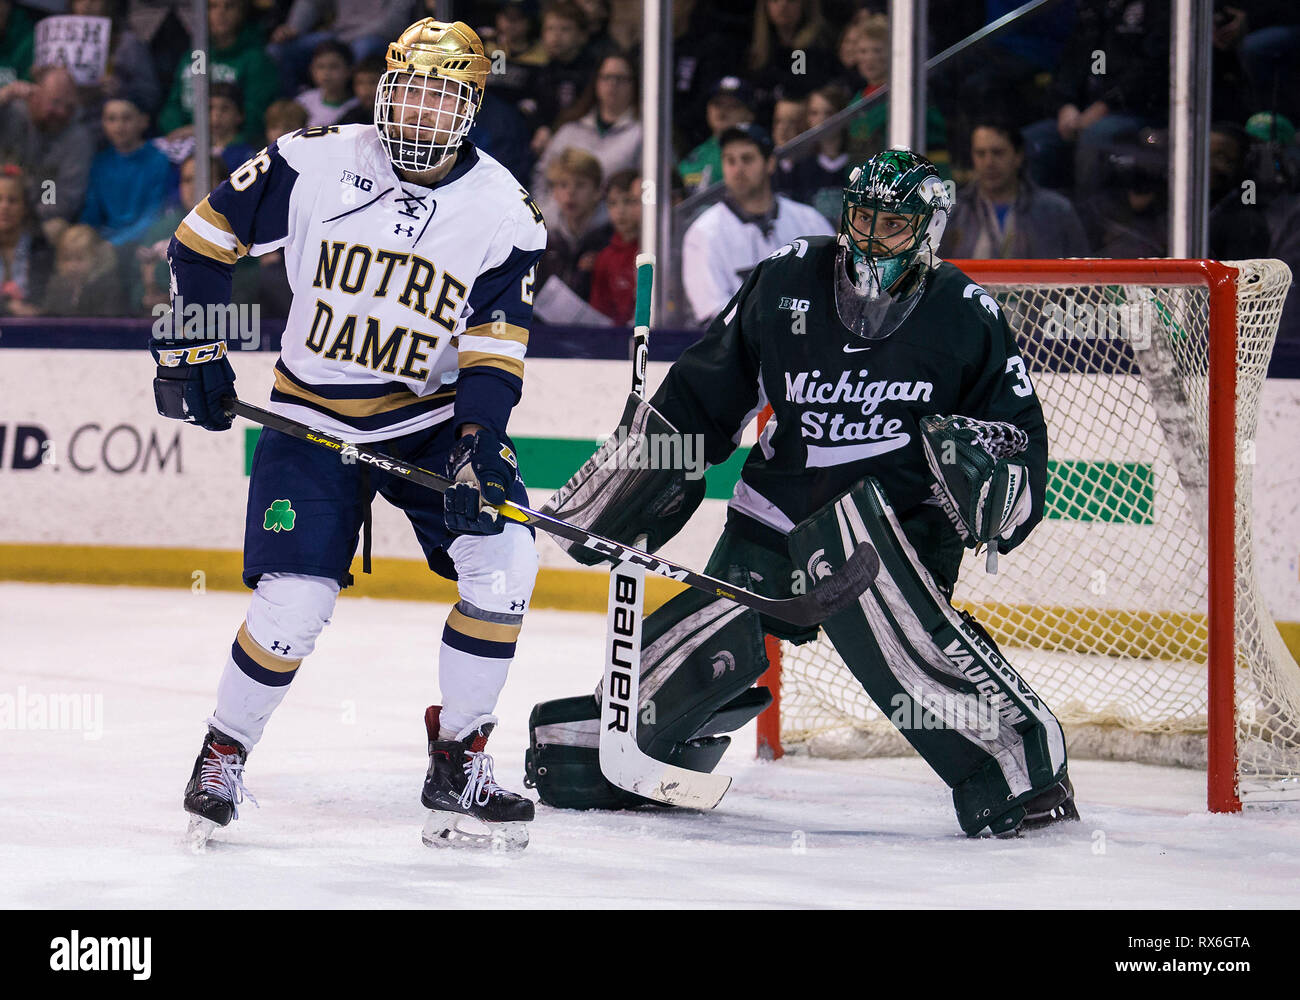 South Bend, Indiana, USA. 08th Mar, 2019. Notre Dame forward Cam Morrison  (26) sets screen in front of Michigan State goaltender John Lethemon (31)  during NCAA Hockey game action between the Michigan